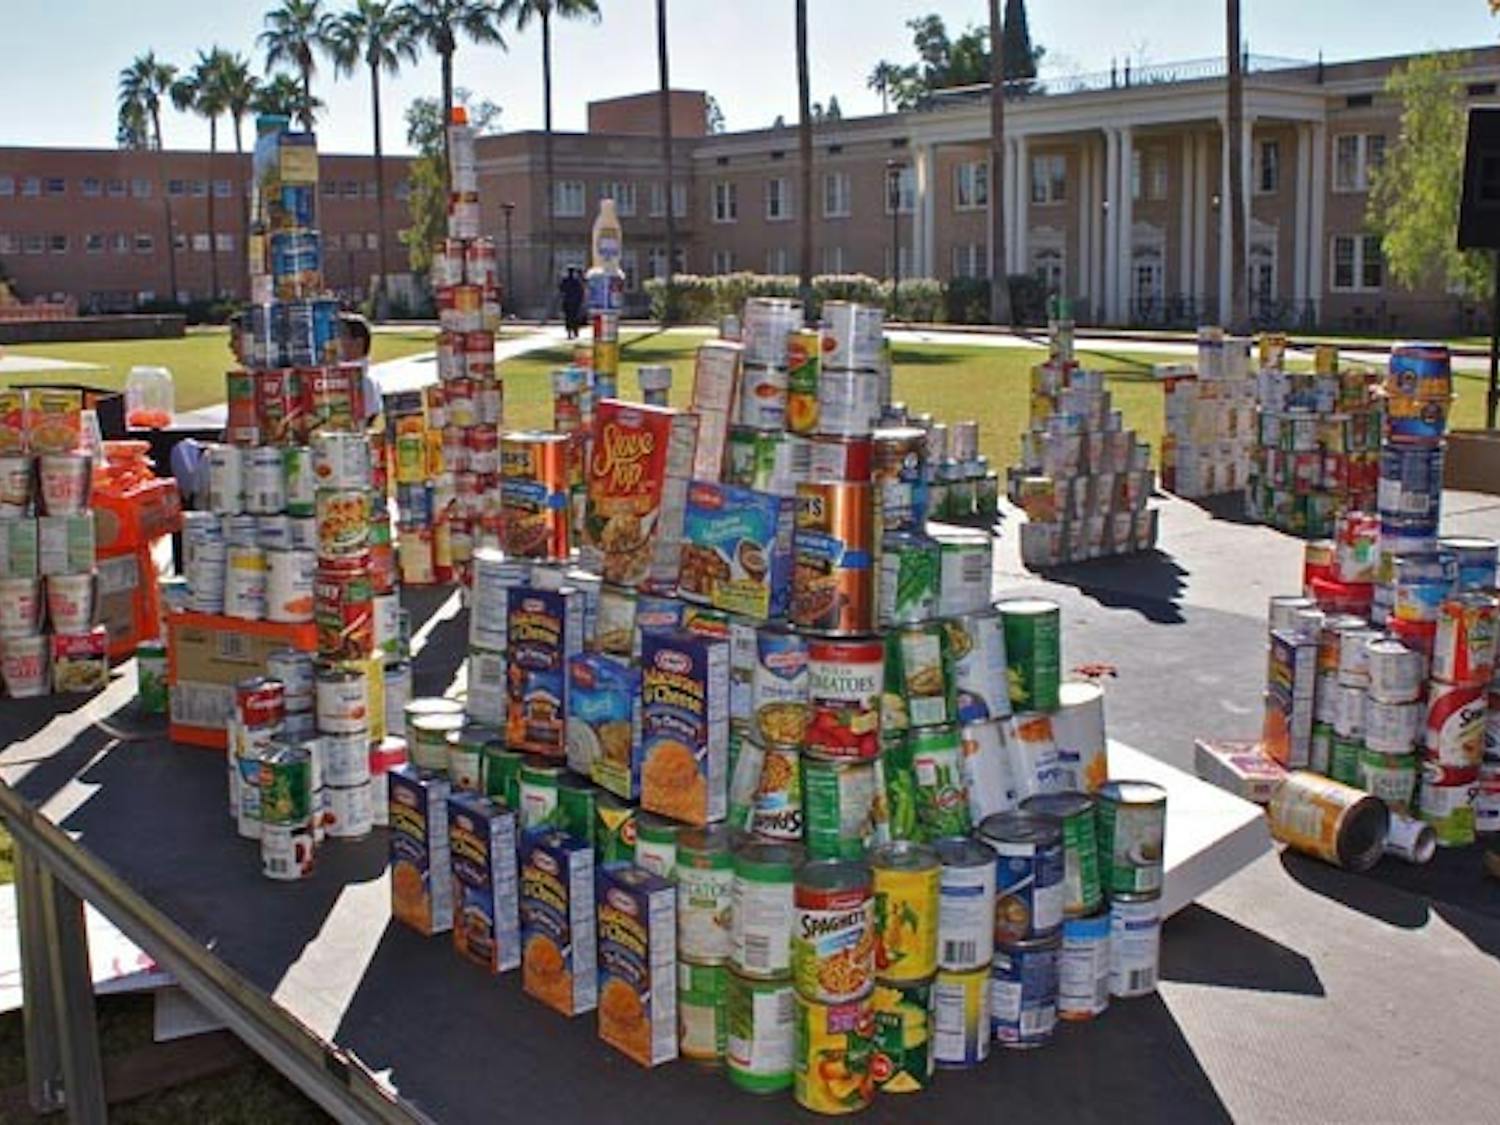 ASU student volunteers put together a food and clothing drive this week, collecting canned food and warm clothing for needy families in time for Thanksgiving. (Photo by Rosie Gochnour)